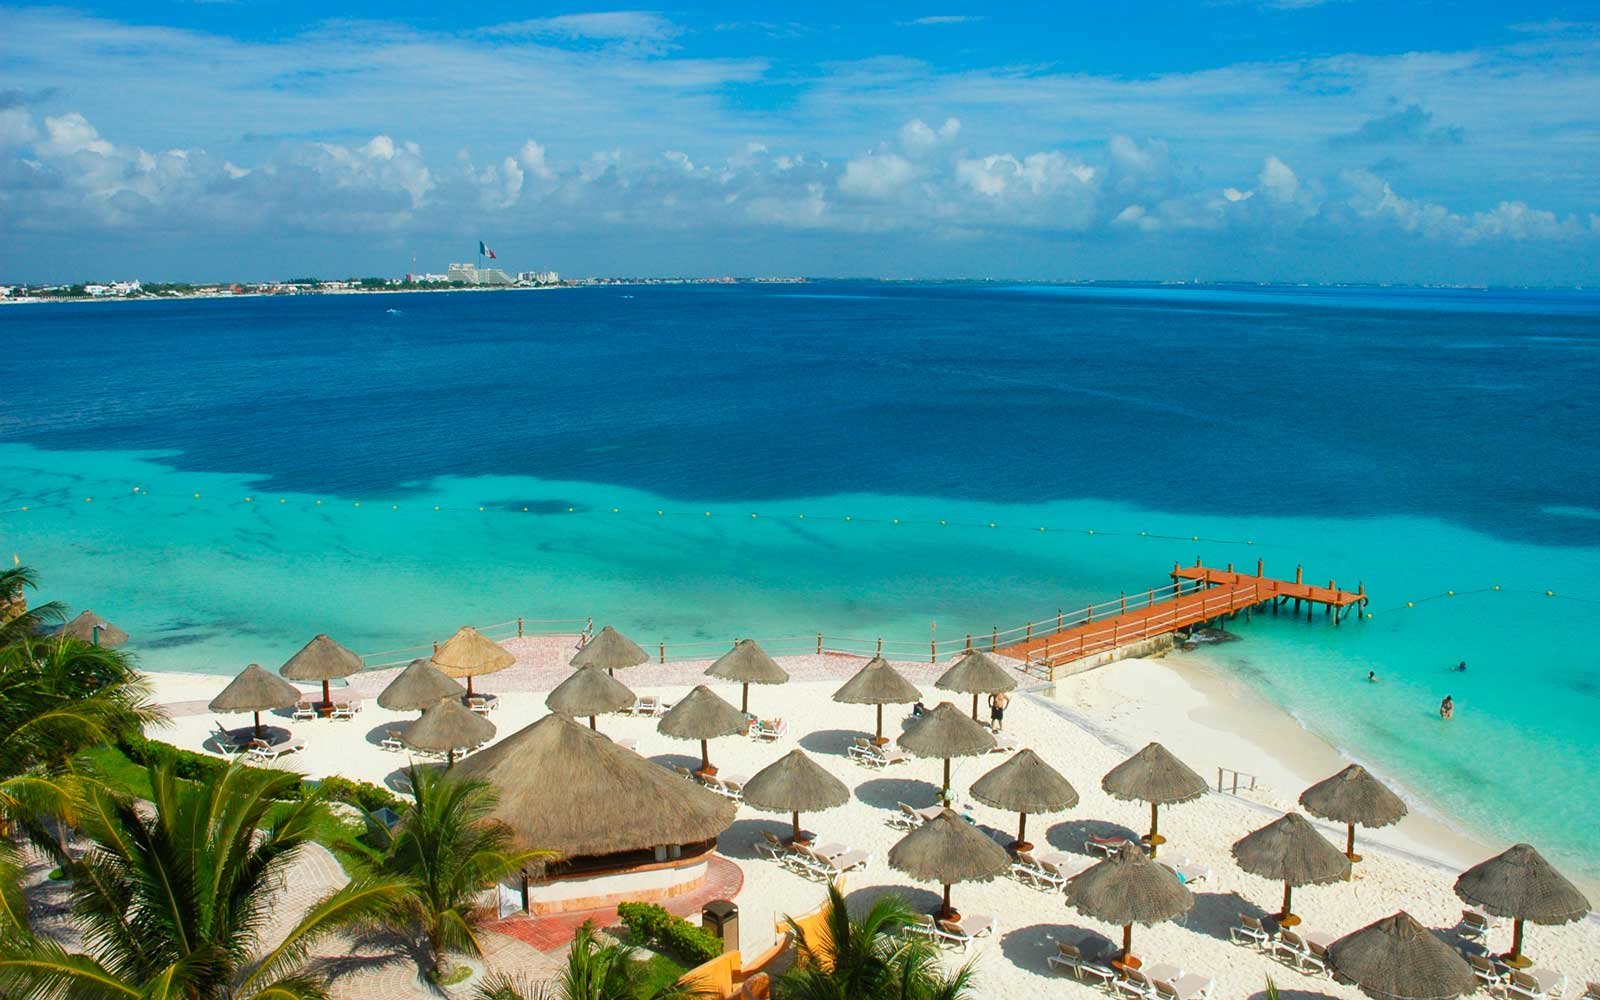 Raleigh NC to Cancun Mexico $280 RT Nonstop Airfares on JetBlue Airways Blue Basic (Travel August - October 2021)